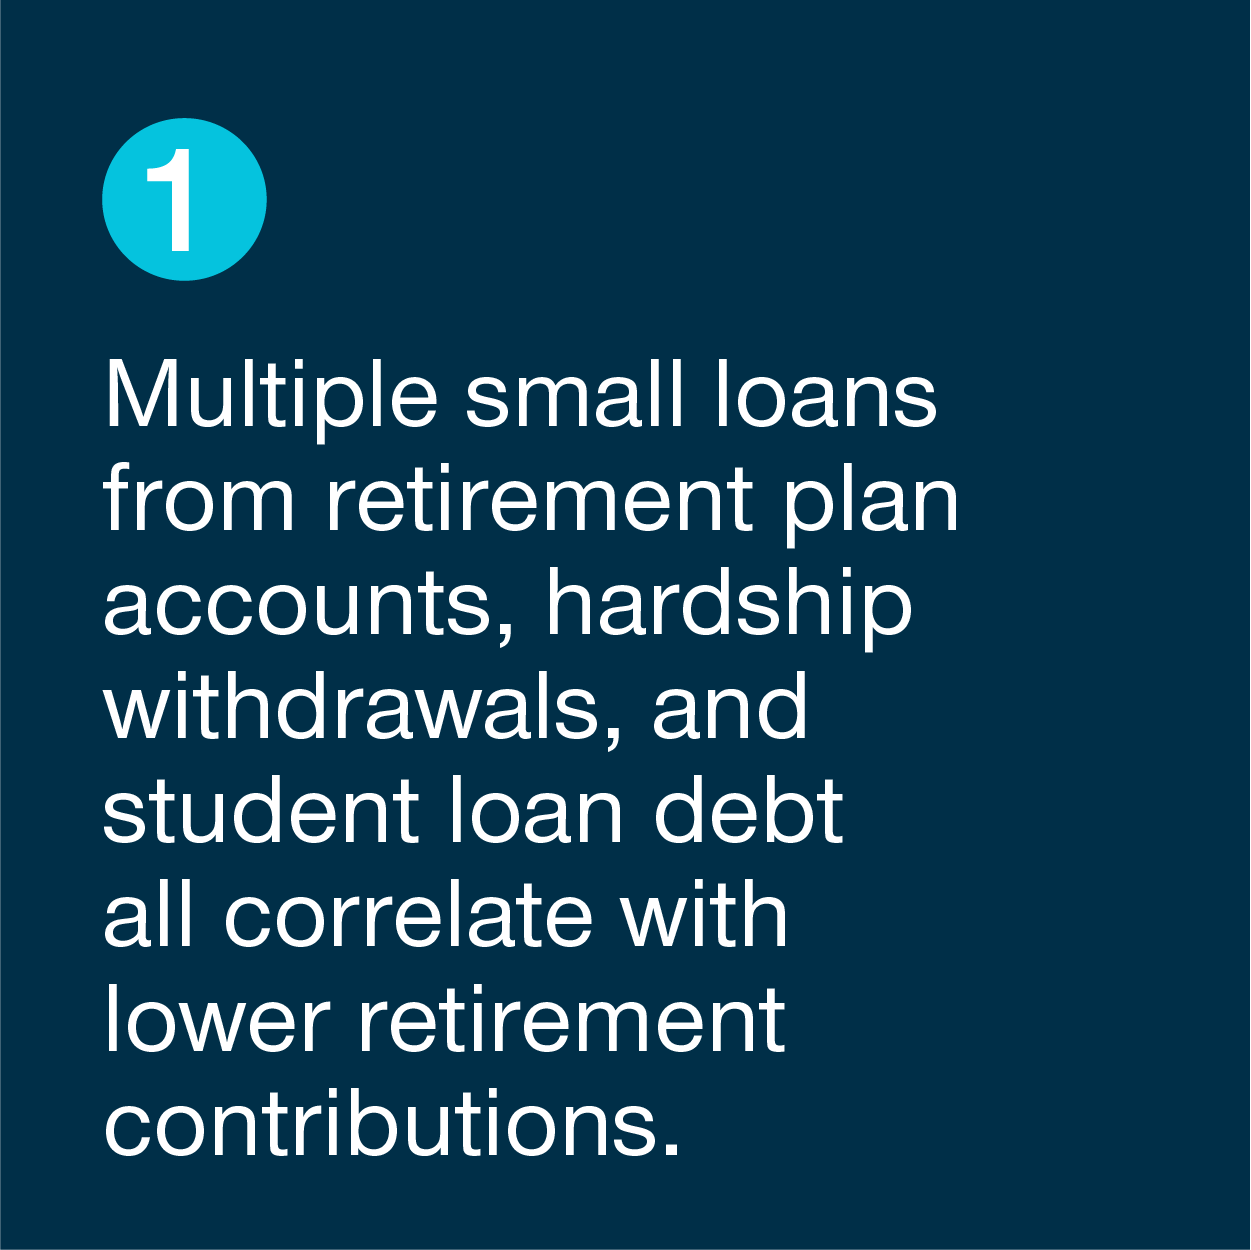 Multiple small loans from retirement plan accounts, hardship withdrawals, and student loan debt all correlate with lower